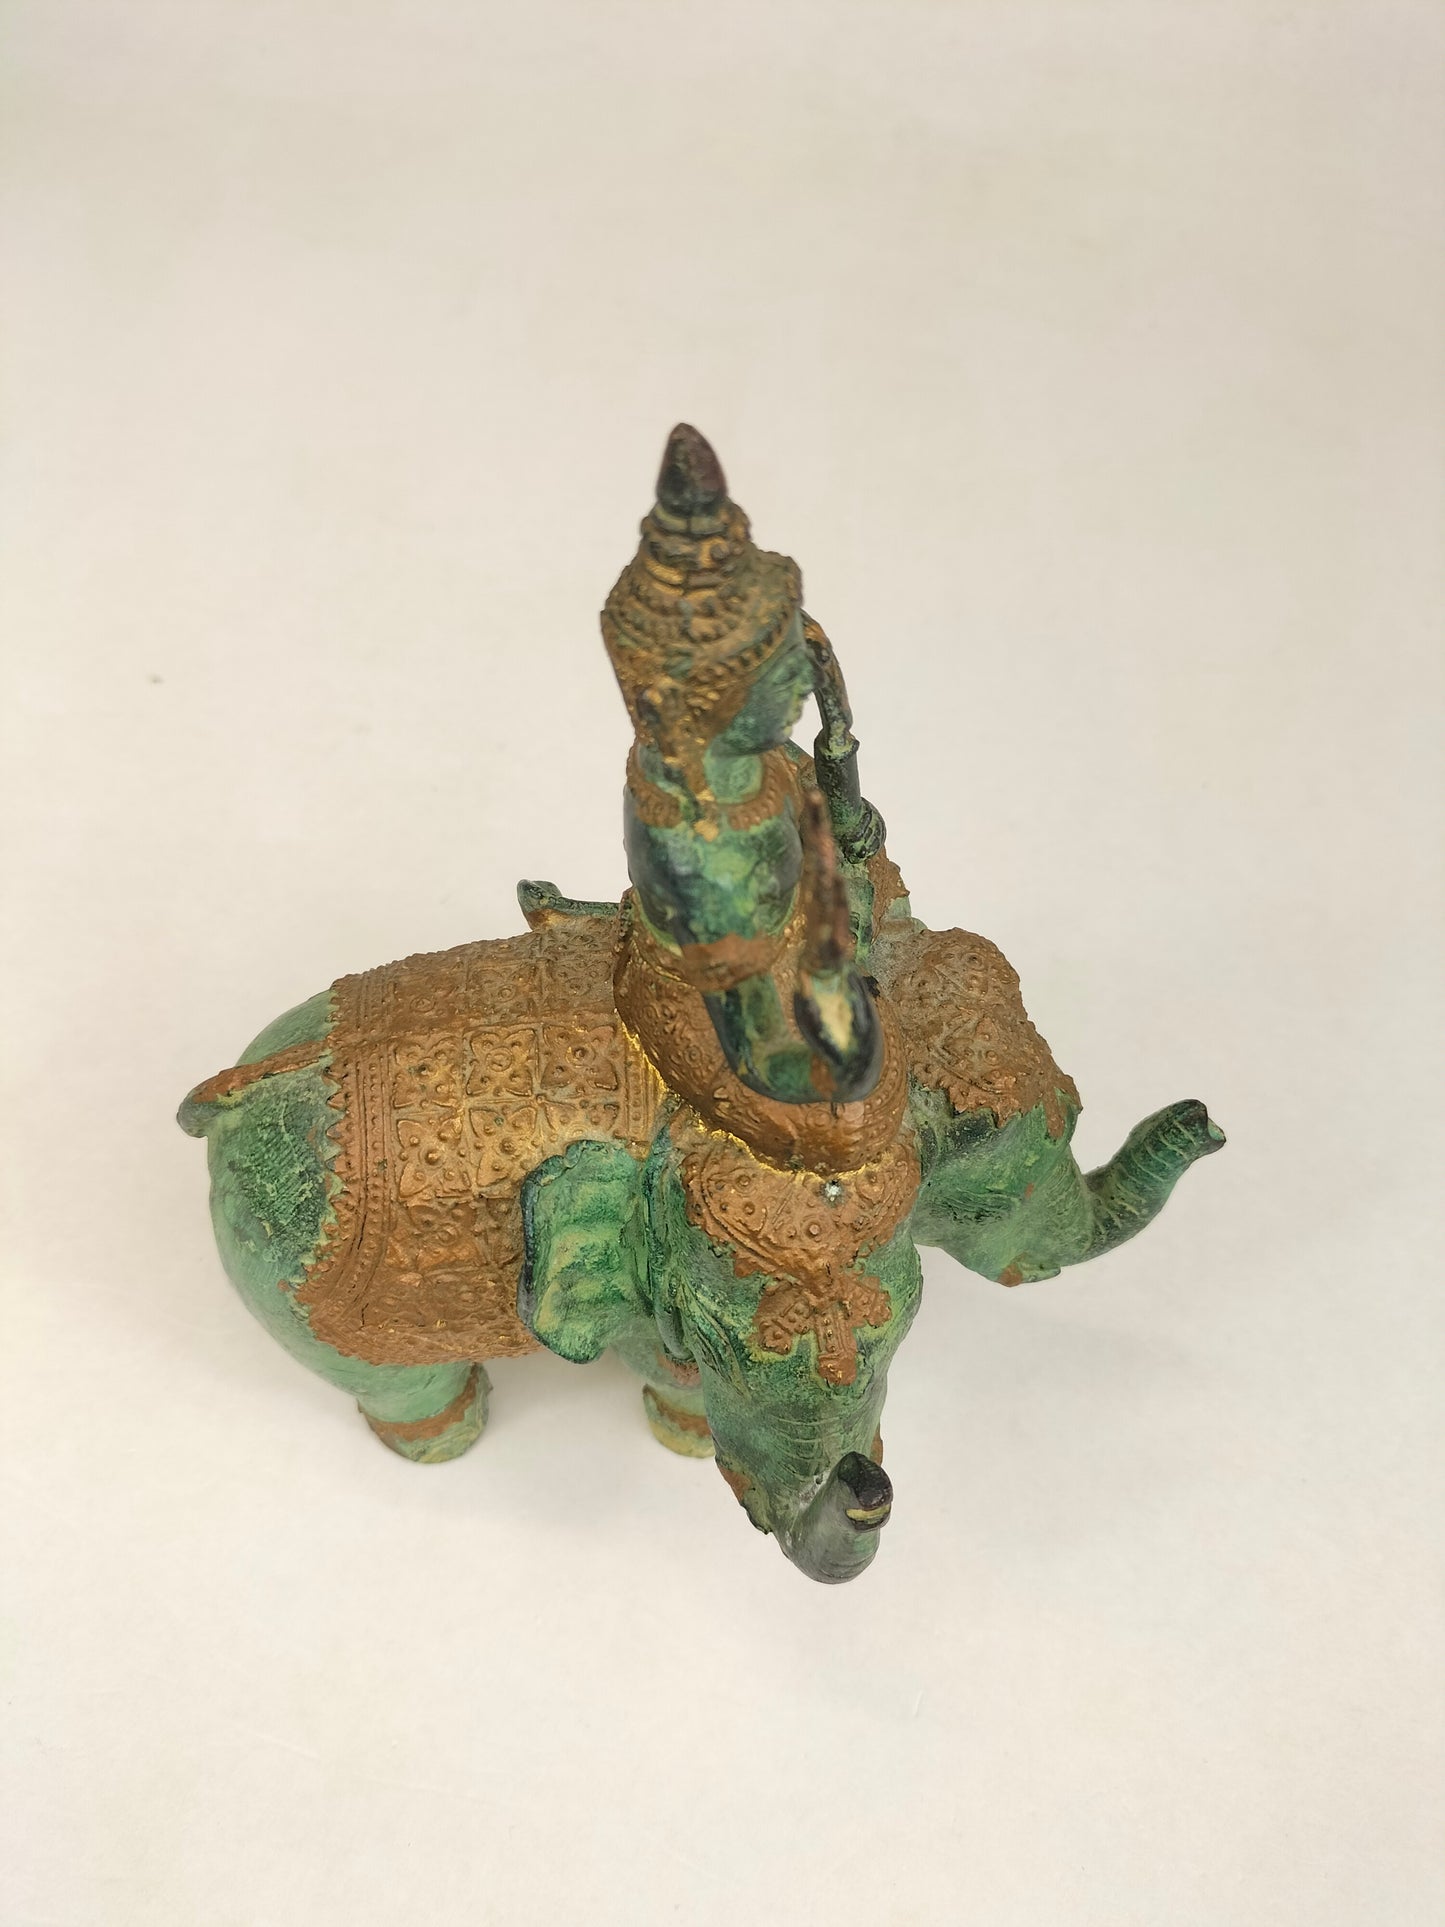 Bronze gilded statue of a temple guardian riding an elephant // Thailand - 20th century